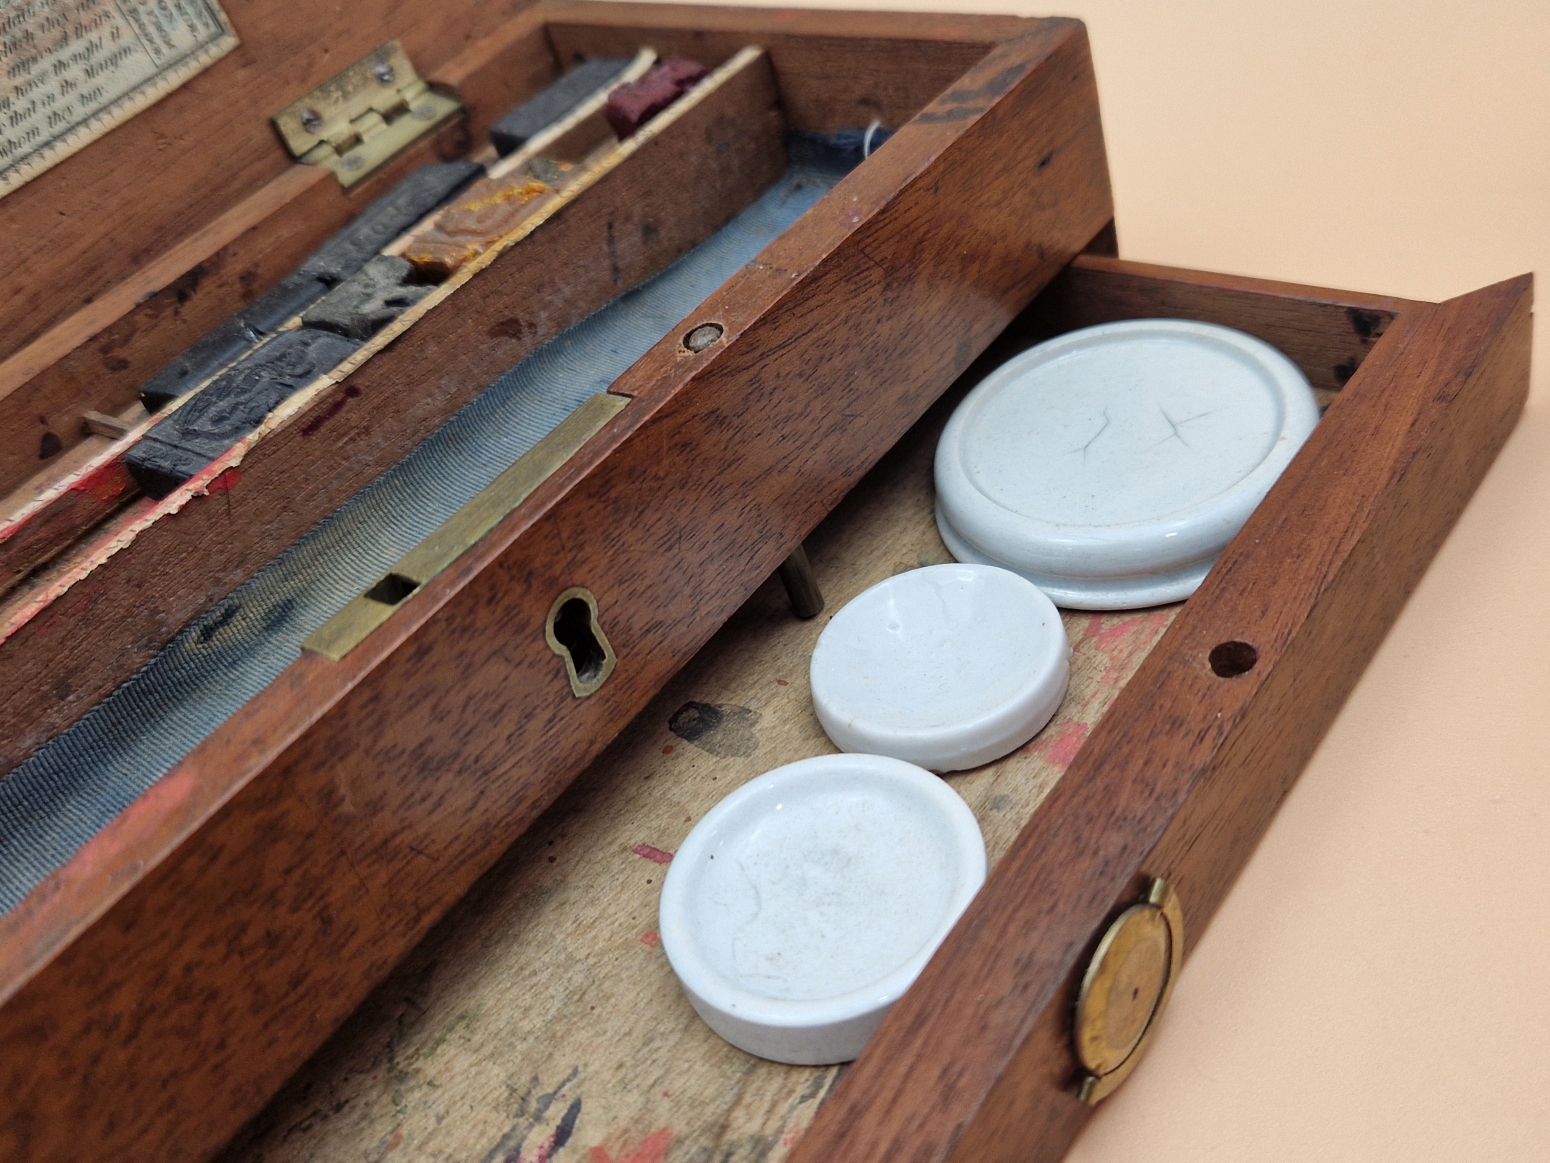 A LATE 19th C. REEVES MAHOGANY PAINT BOX CONTAINING SOME BLOCKS OF UNUSED PAINT AND CERAMIC PALETTES - Image 4 of 9